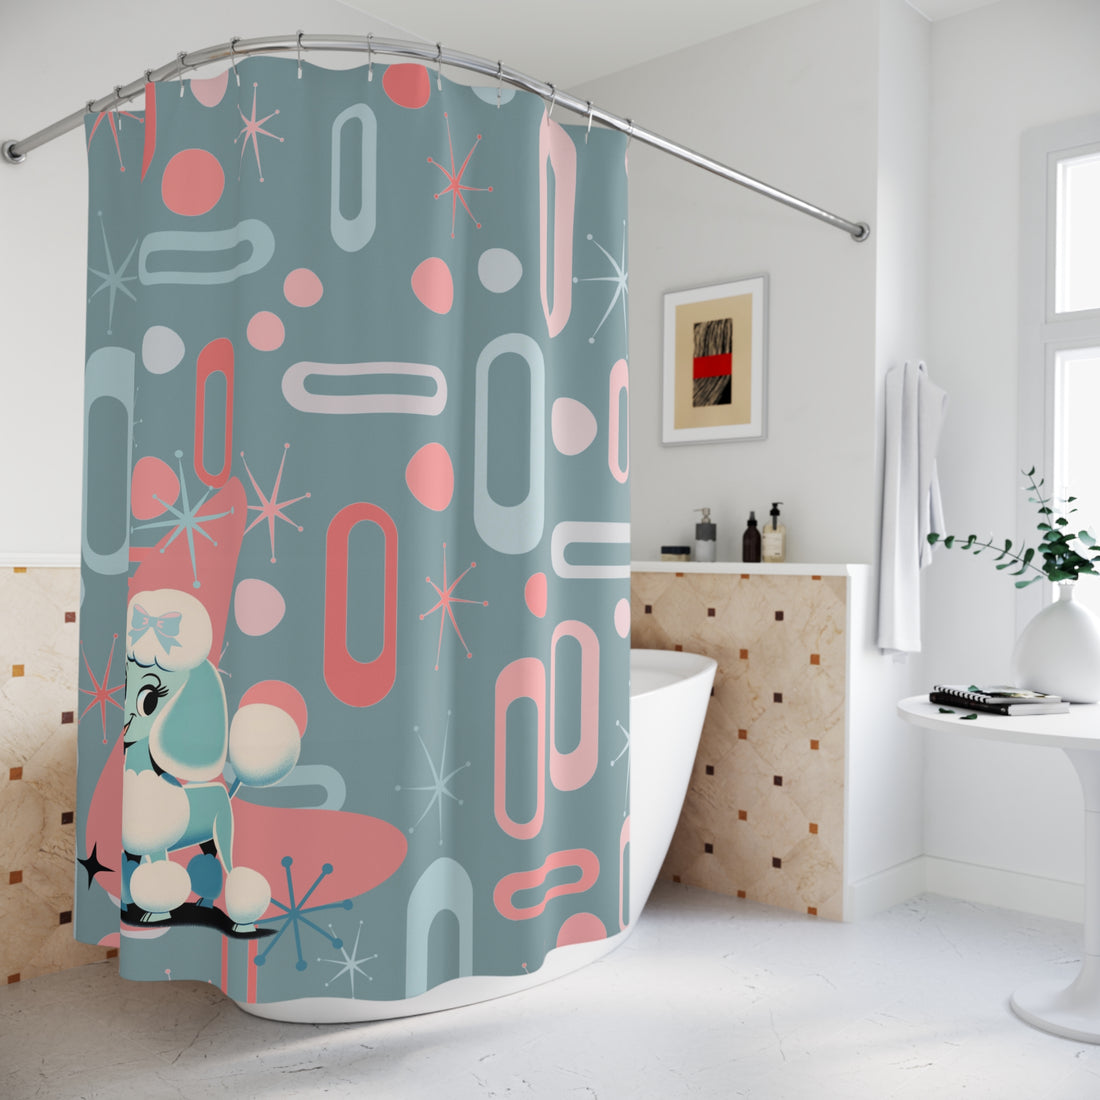 Mid Century Modern Atomic 50s Kitschy Cute Poodle Retro Shower Curtain